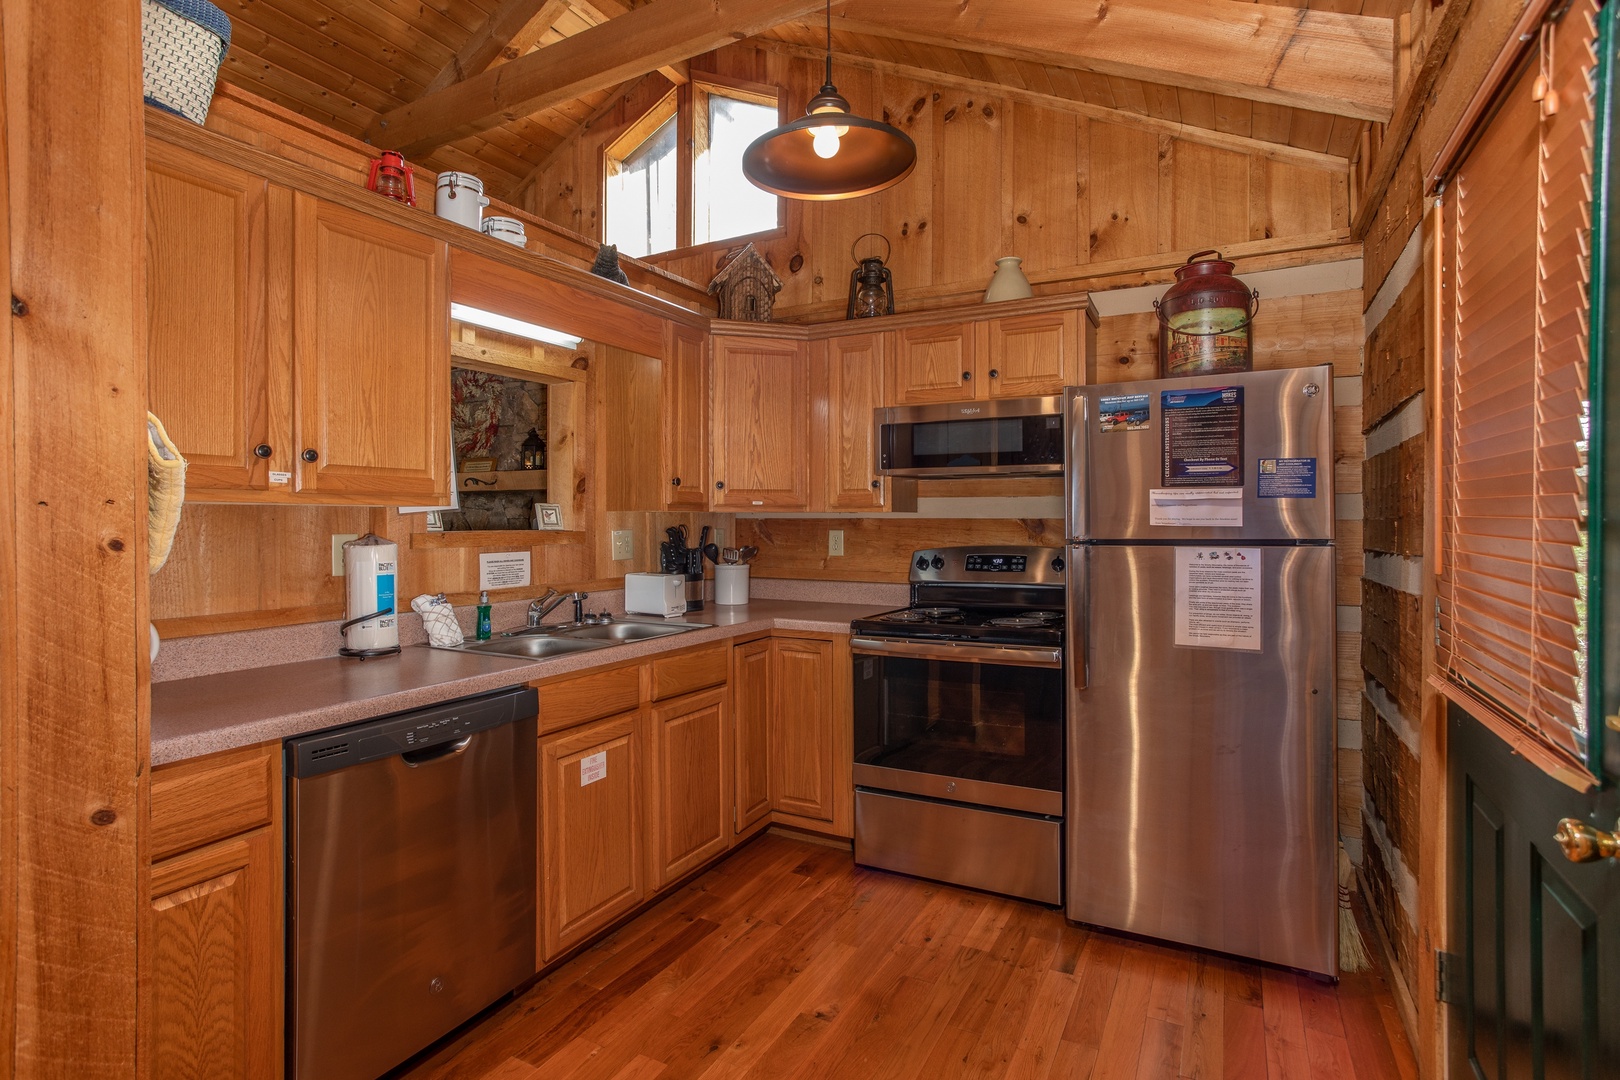 Kitchen with stainless appliances at Blue Mountain Views, a 1 bedroom cabin rental located in Pigeon Forge